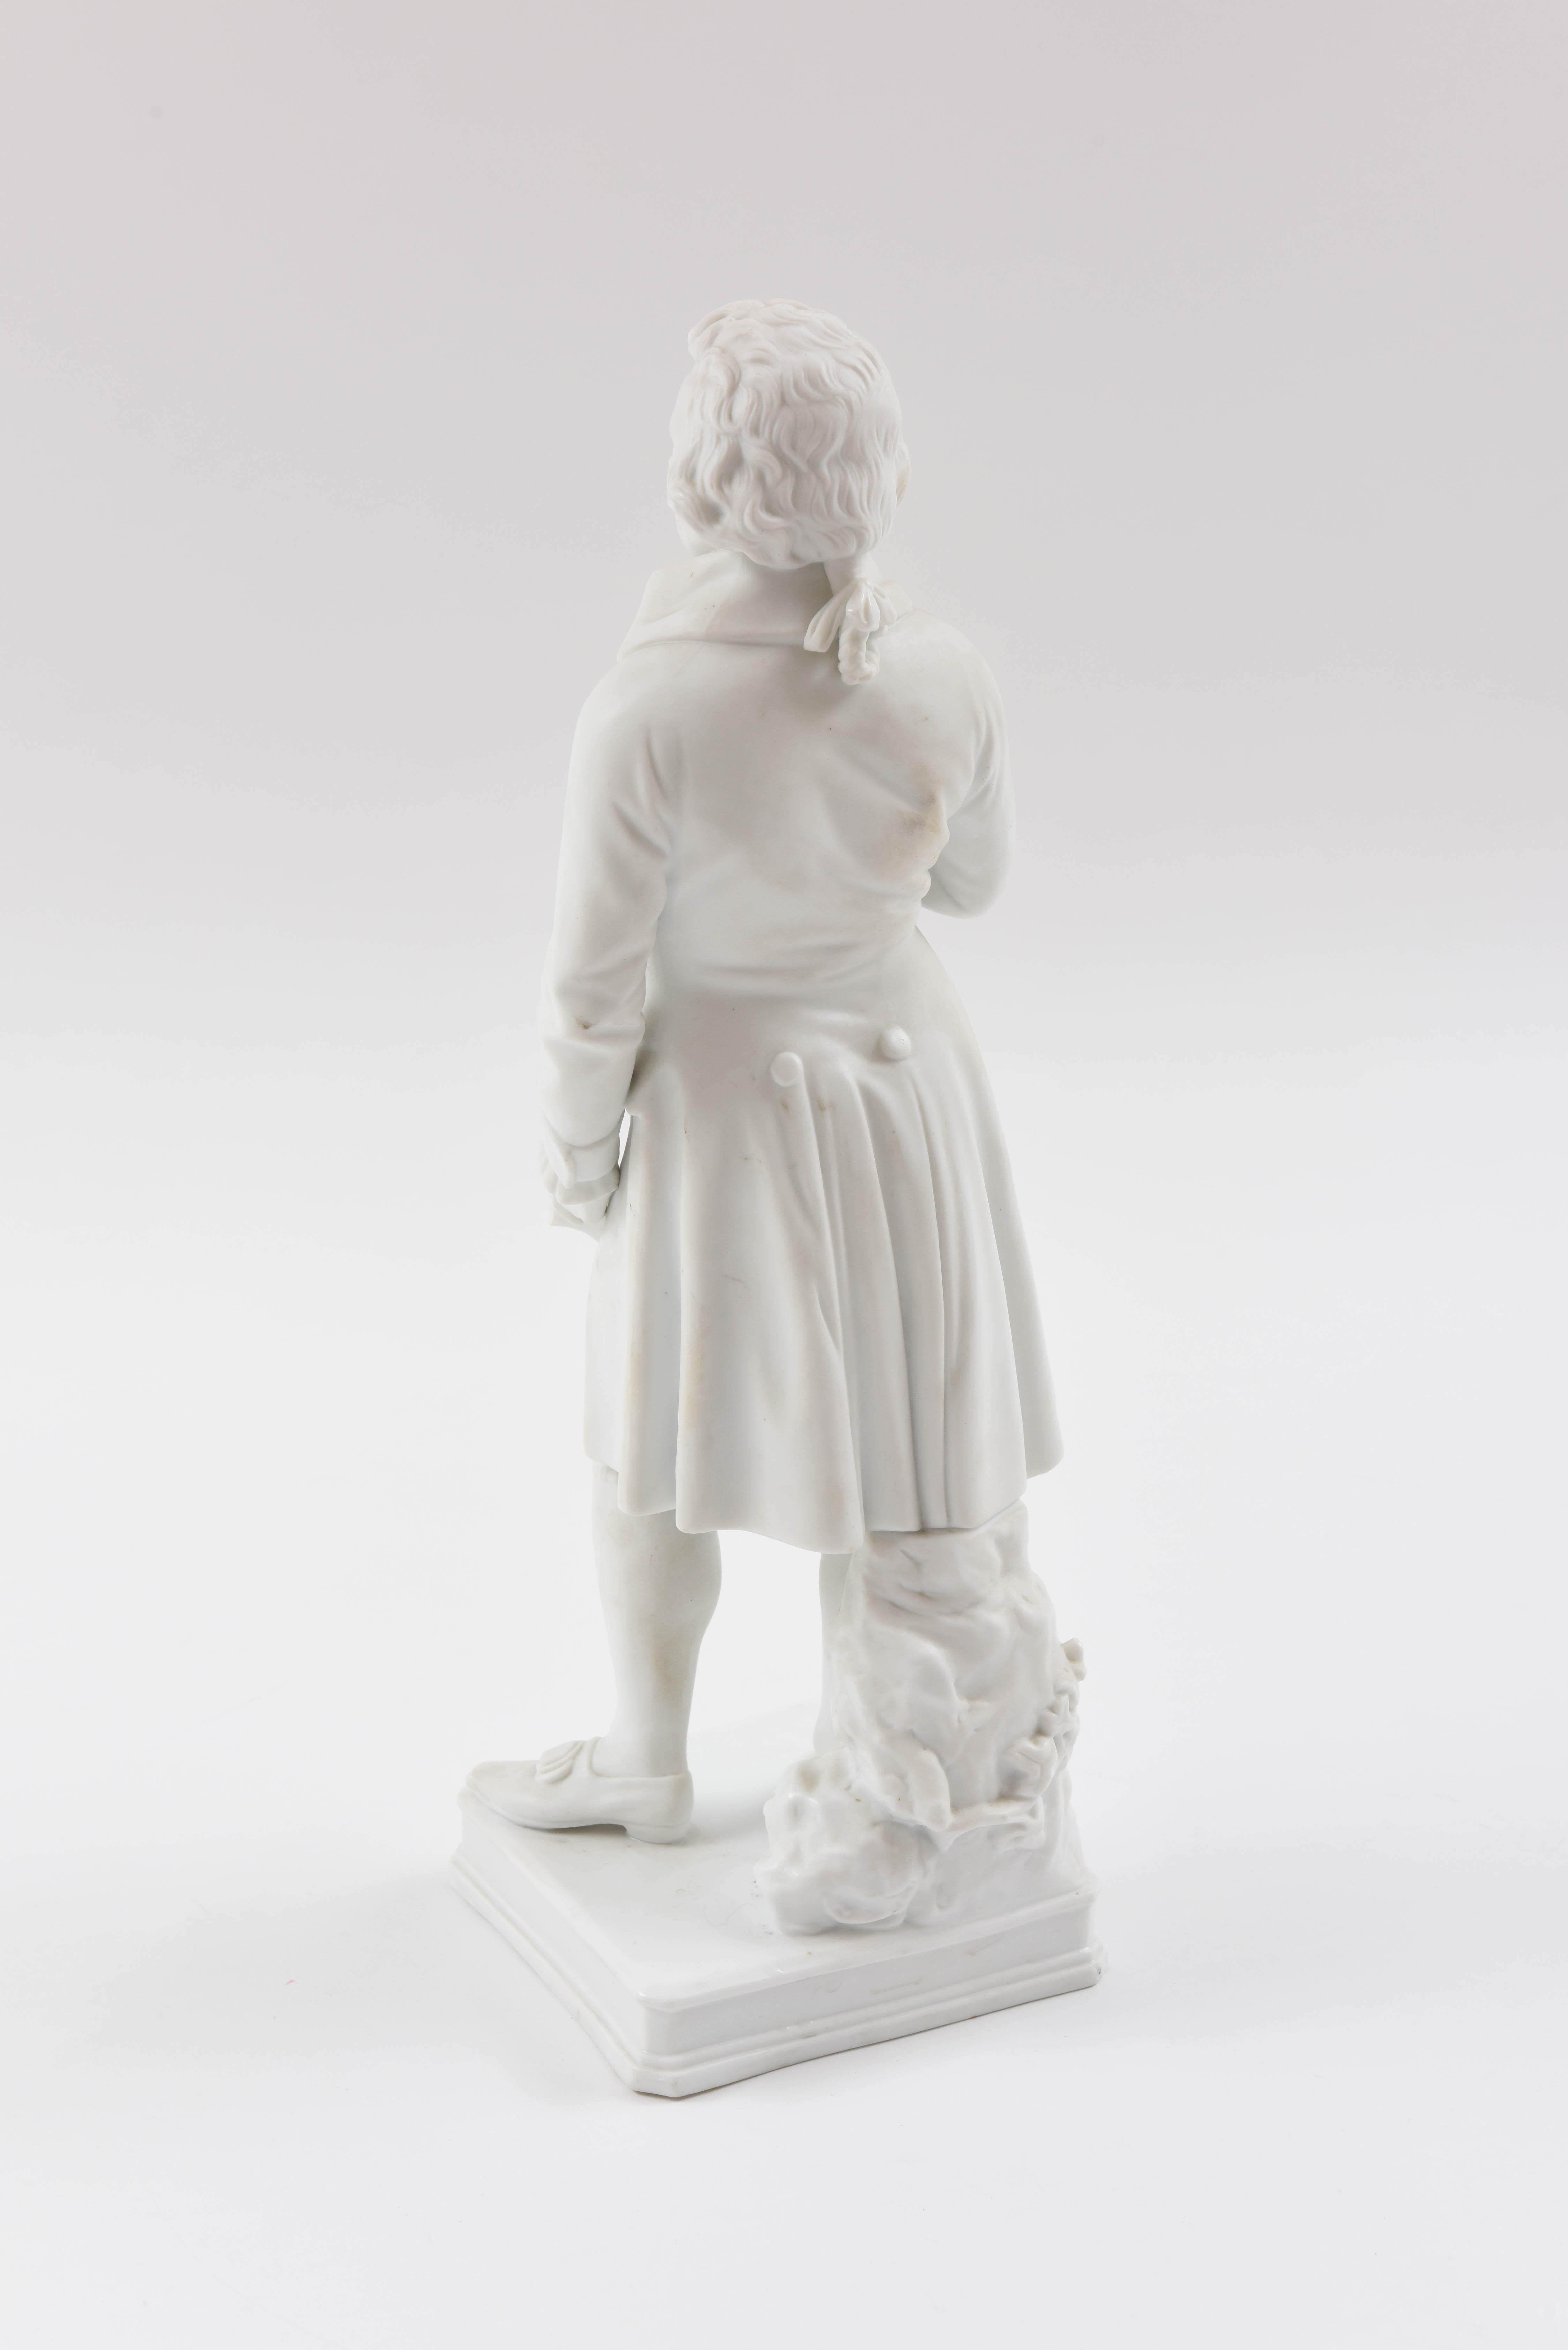 Porcelain Mozart White Parian Figure, 19th Century, Tall and Regal